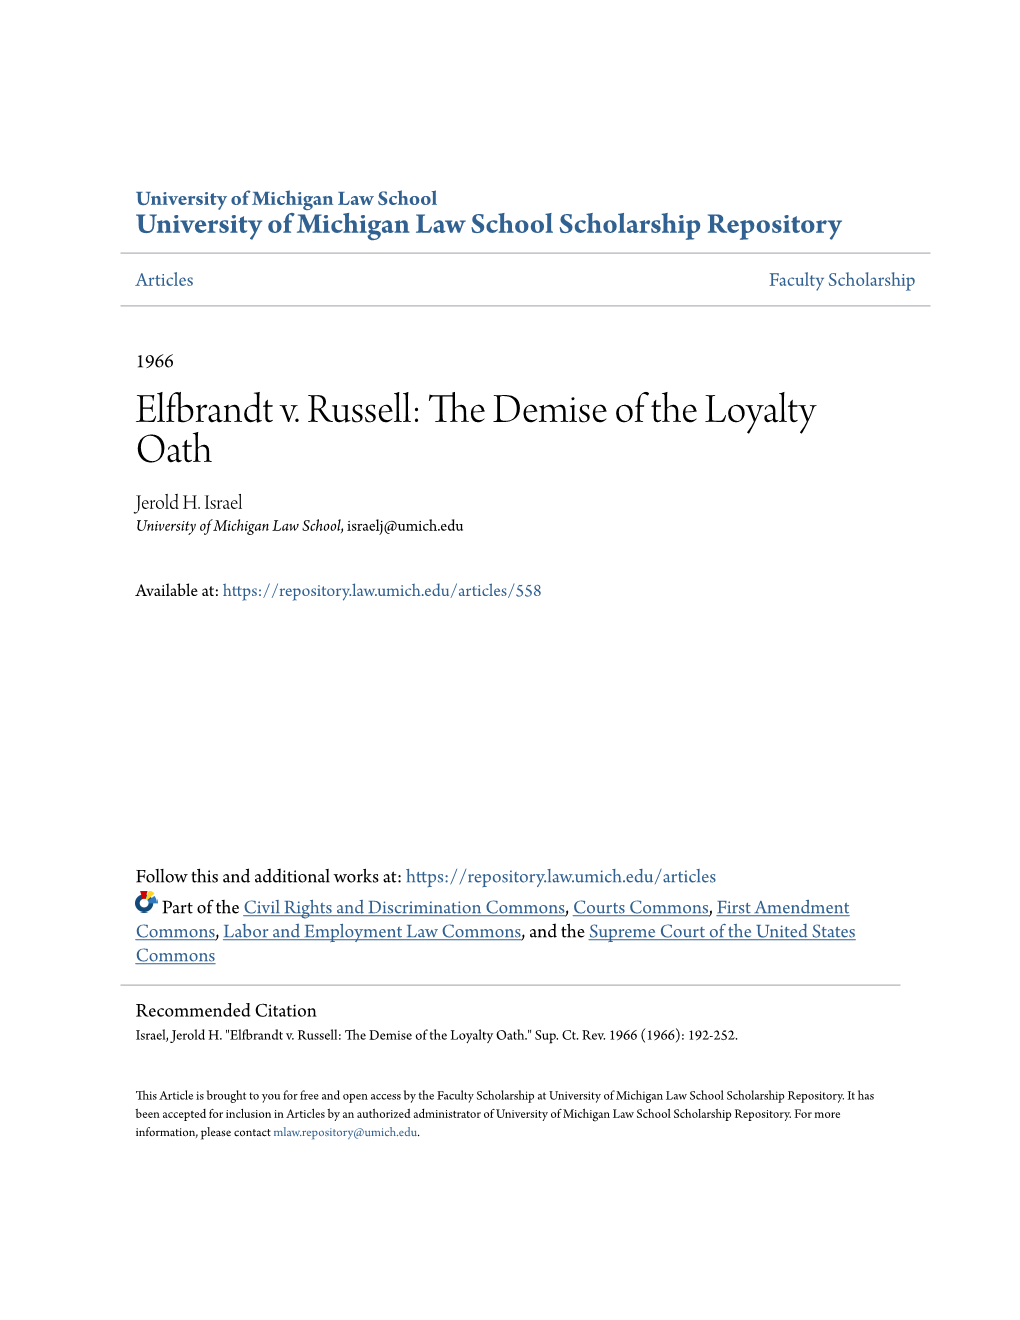 Elfbrandt V. Russell: the Demise of the Loyalty Oath